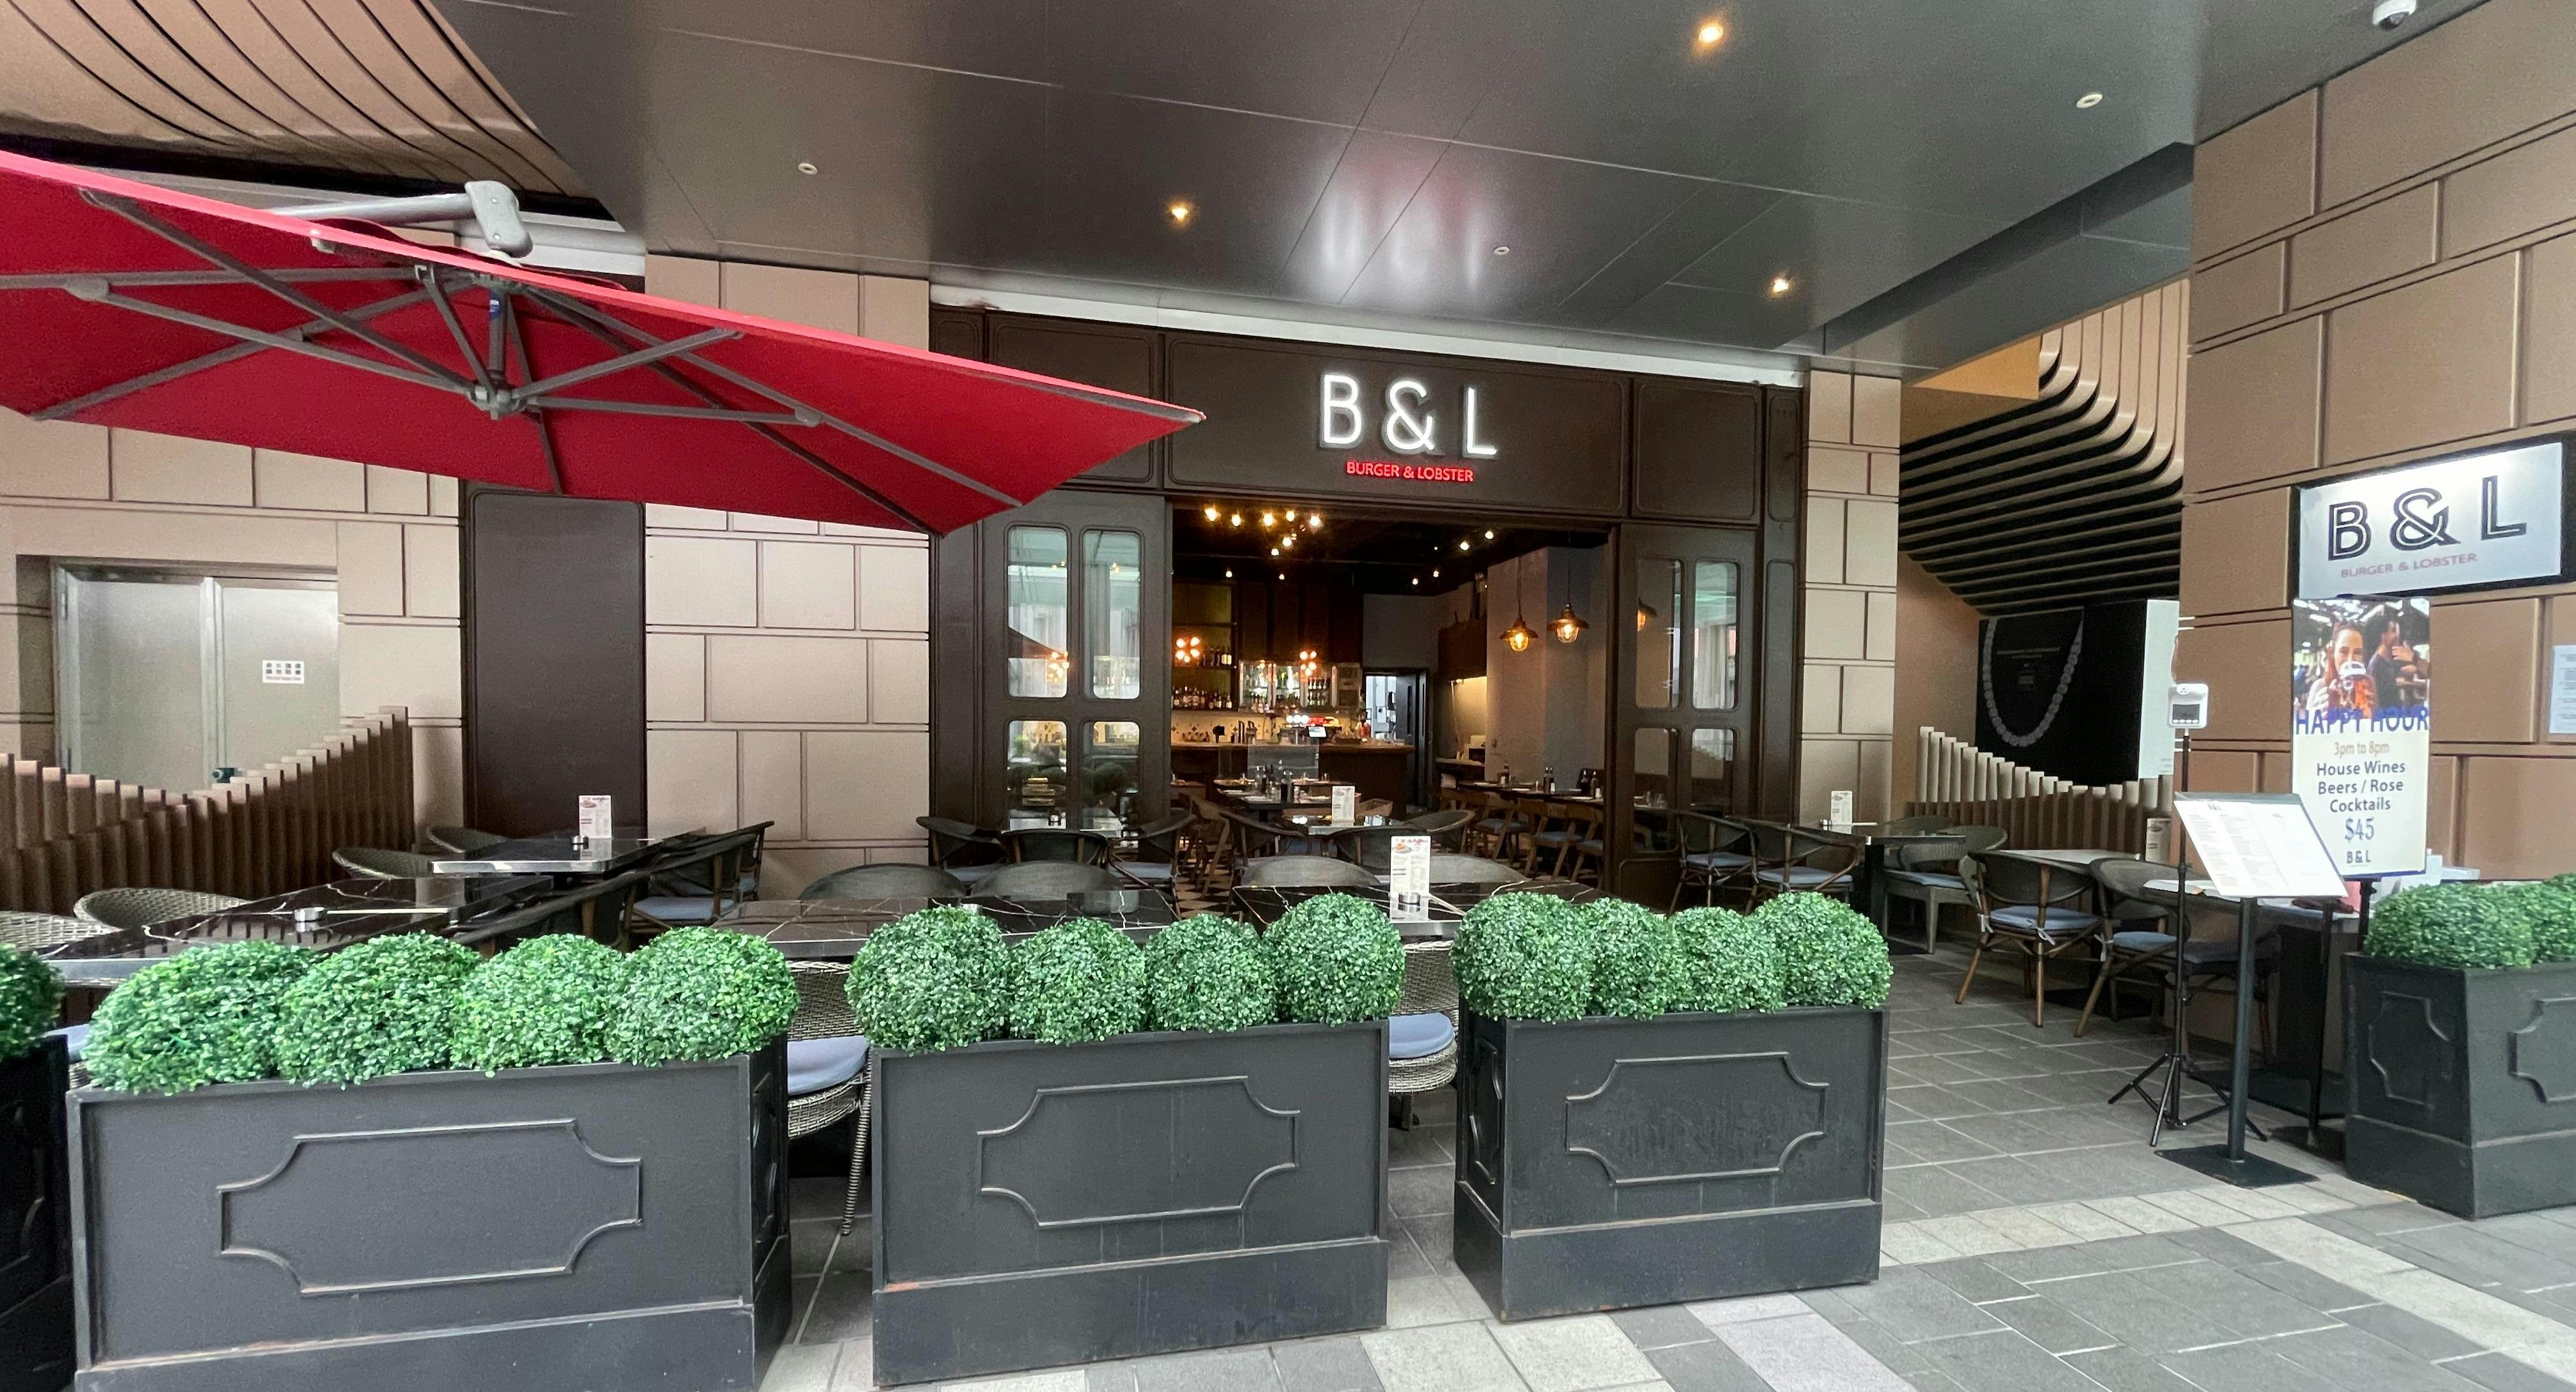 Photo of restaurant B&L - Burger and Lobster in 灣仔, 香港